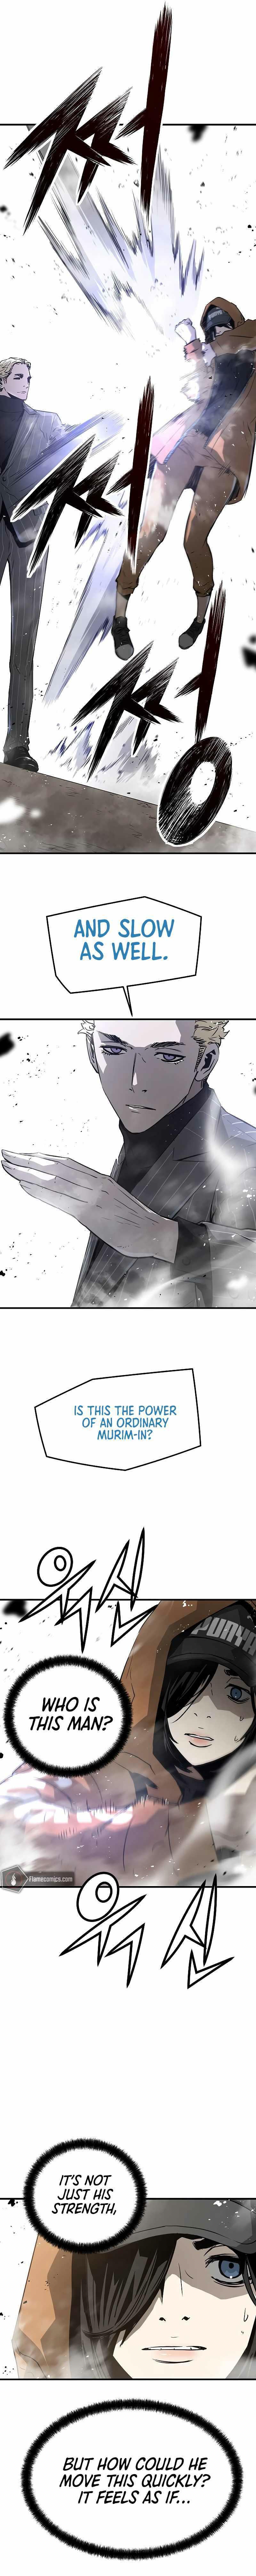 The Breaker: Eternal Force Chapter 91 page 10 - 